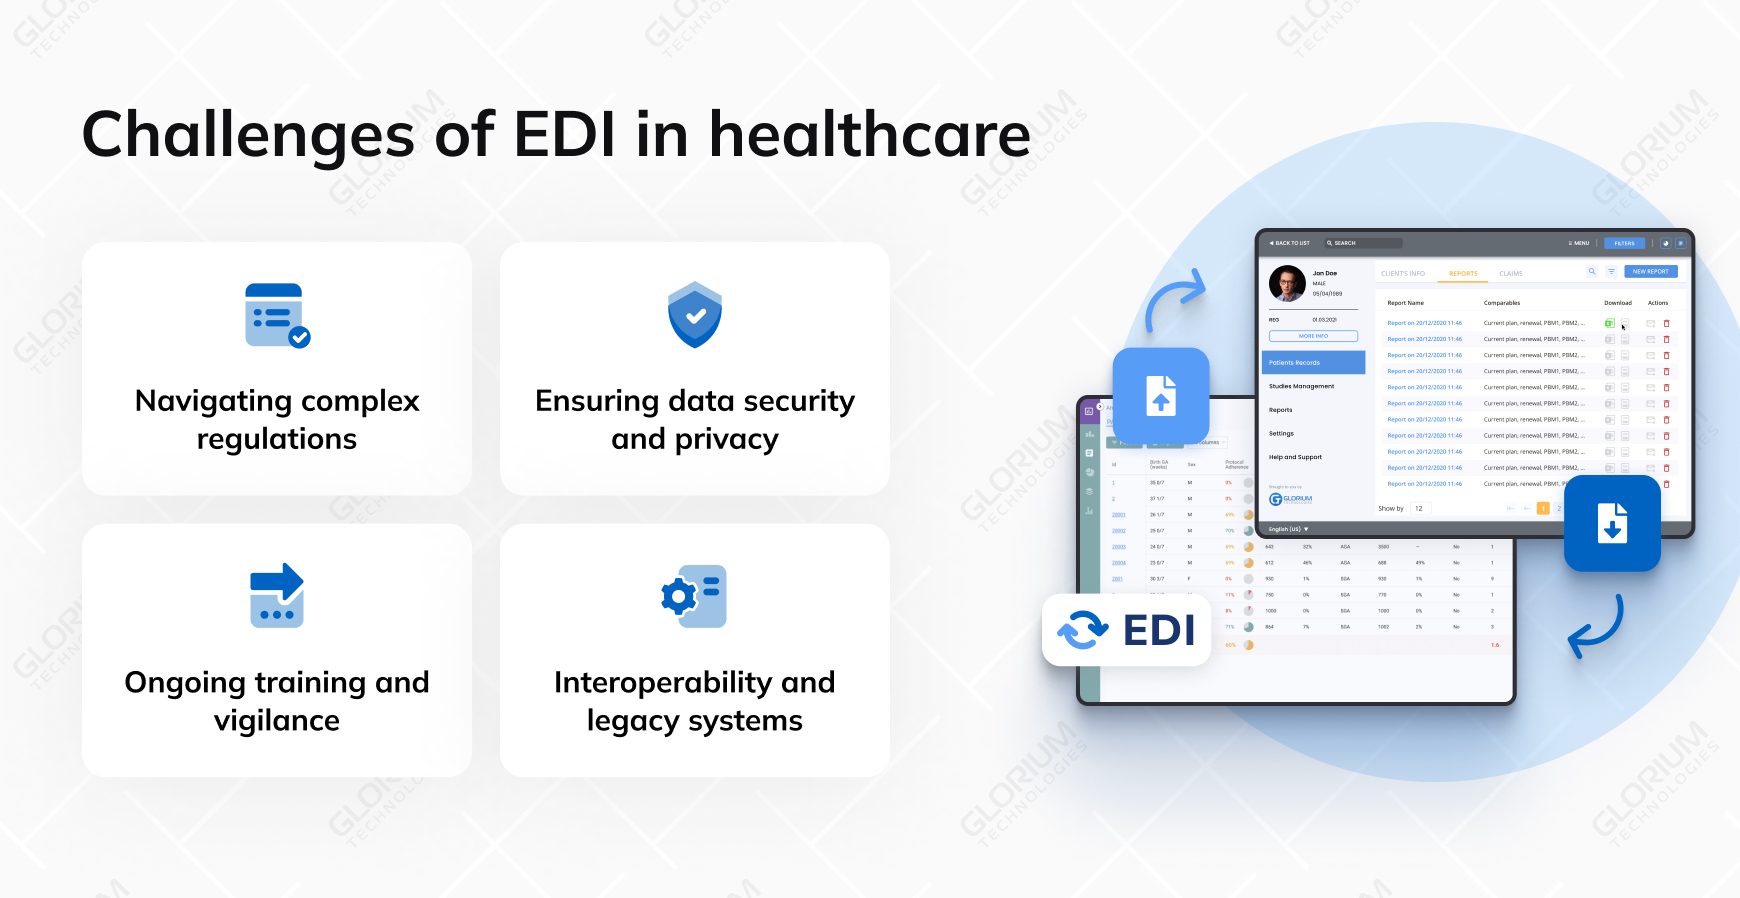 Challenges of EDI in healthcare